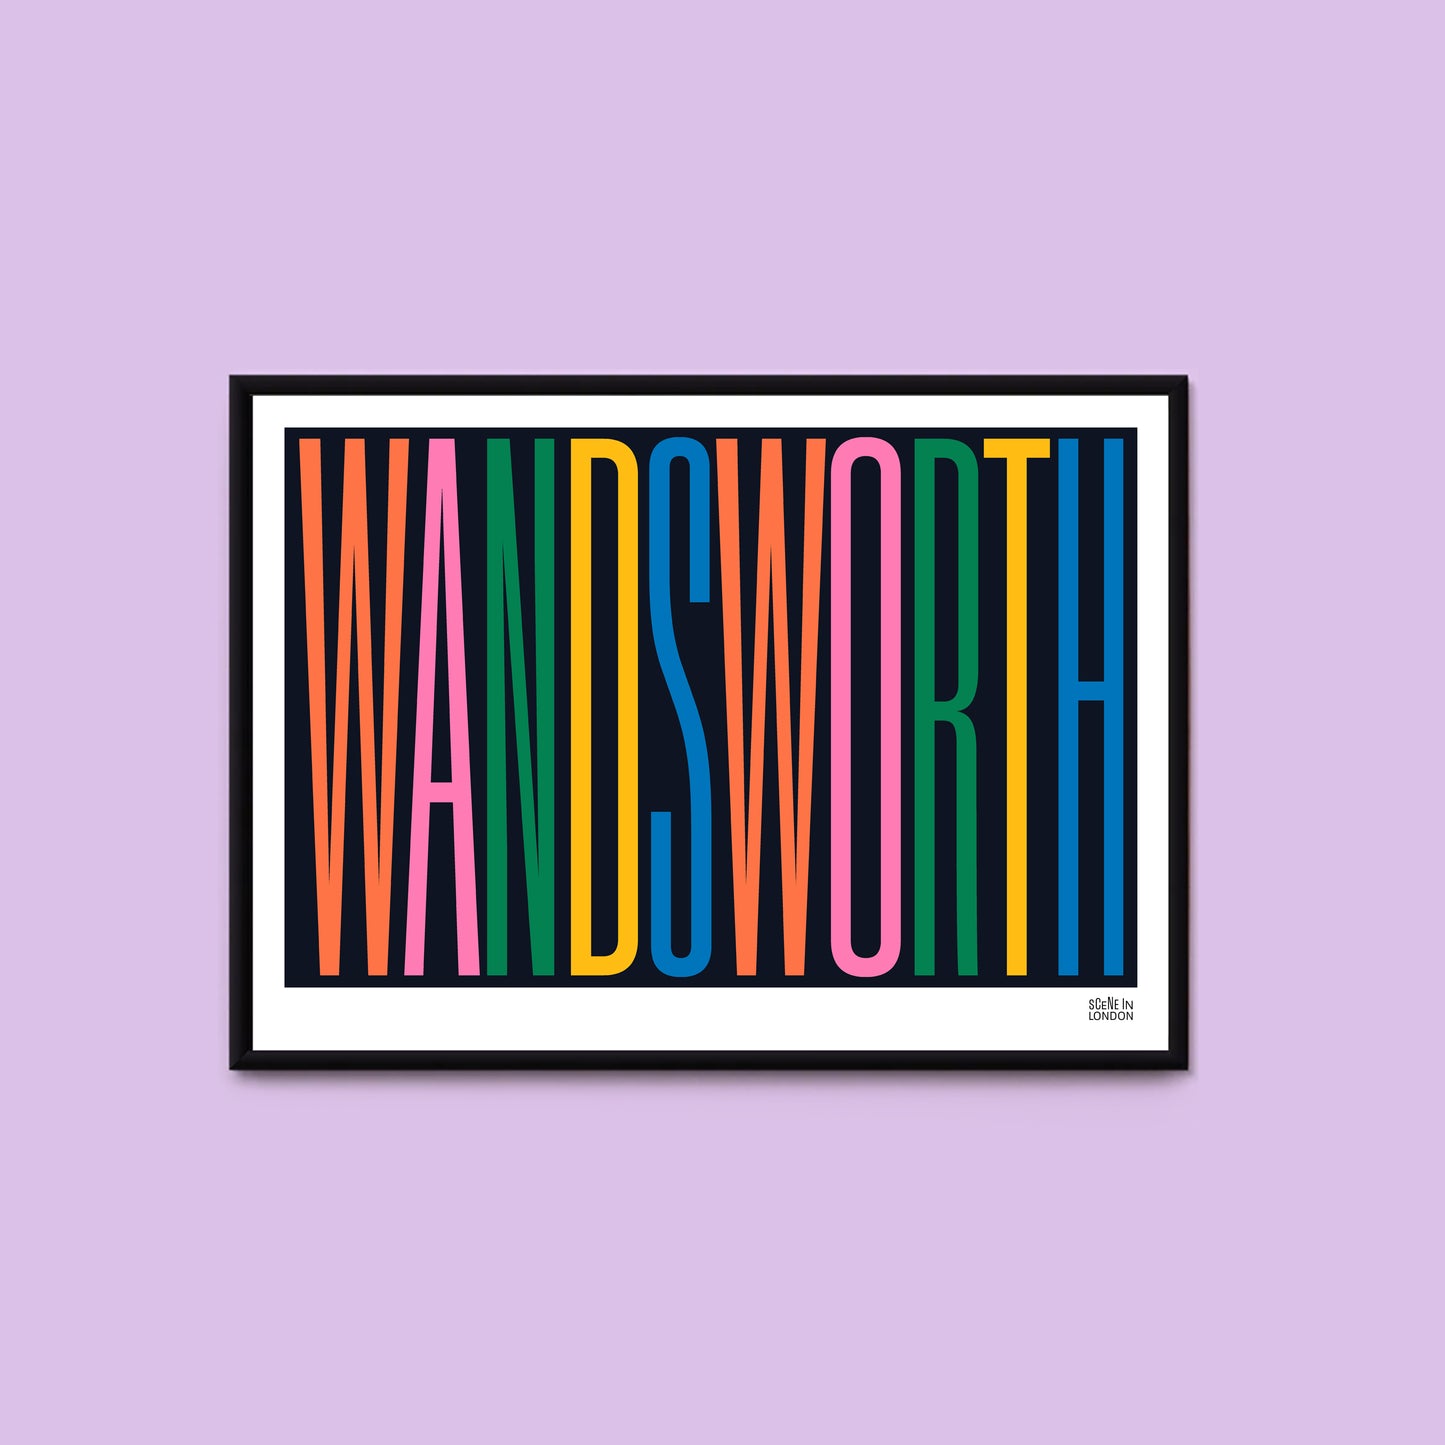 Wandsworth Typography Poster